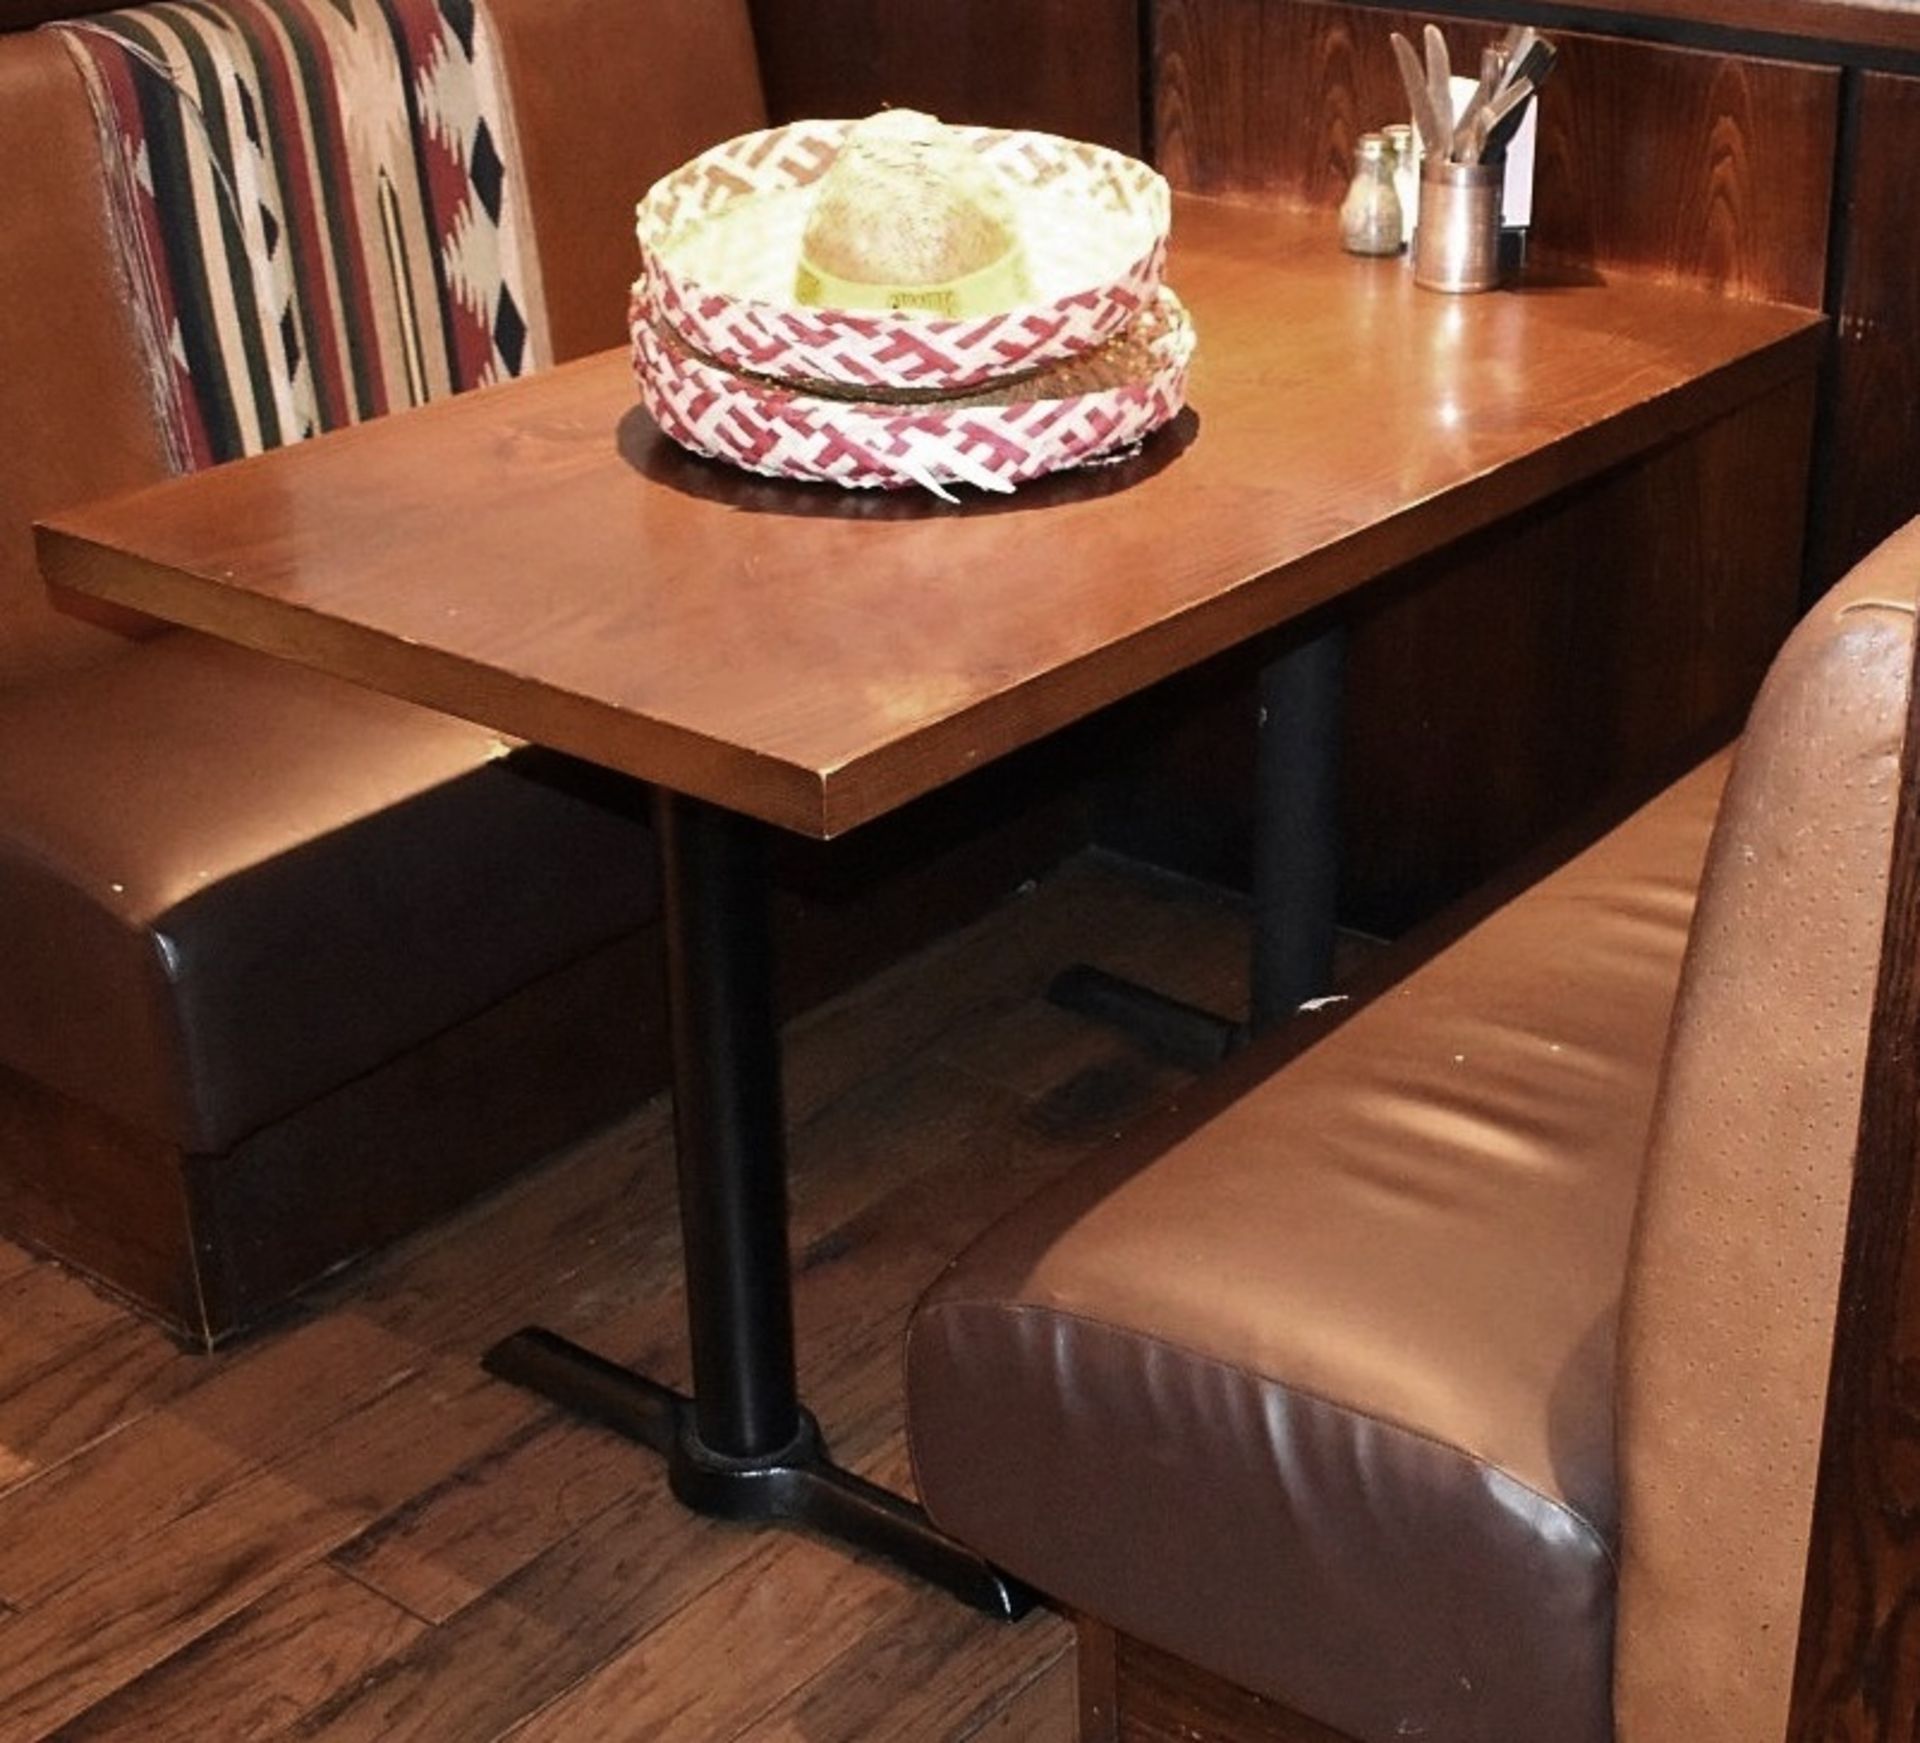 1 x Long Restaurant Dining Table With A Dark Wooden Top And Cast Iron Base - Image 3 of 3